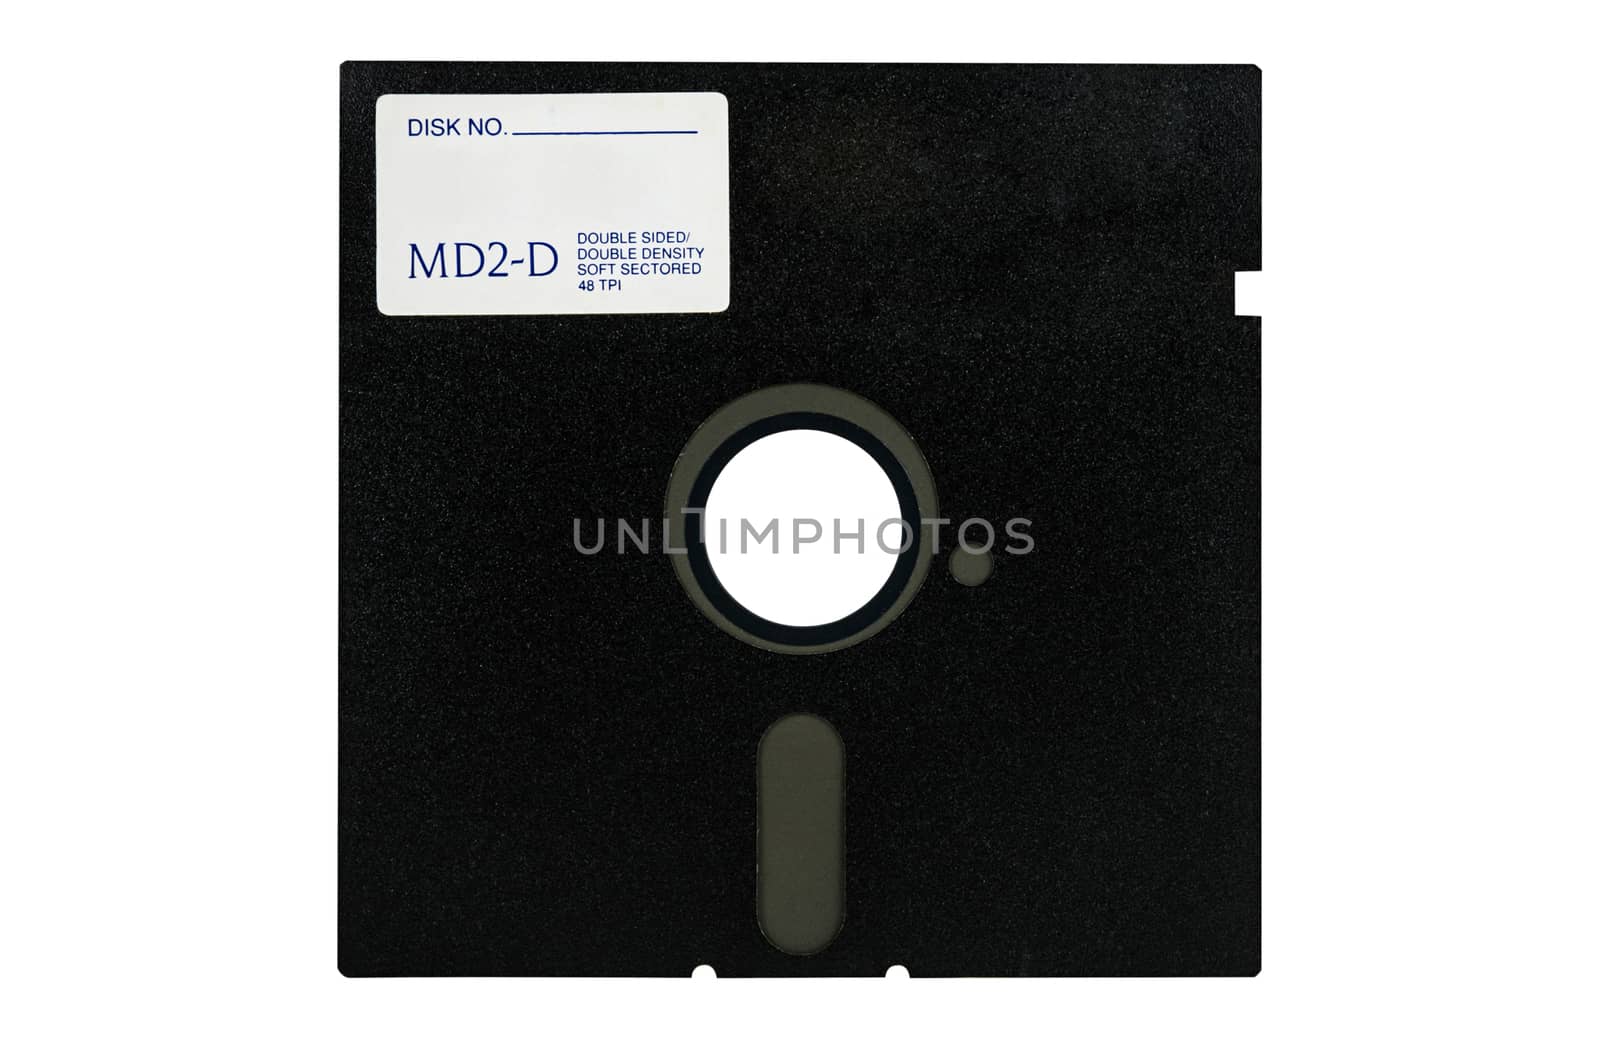 Diskette 5 25 inches by NuwatPhoto